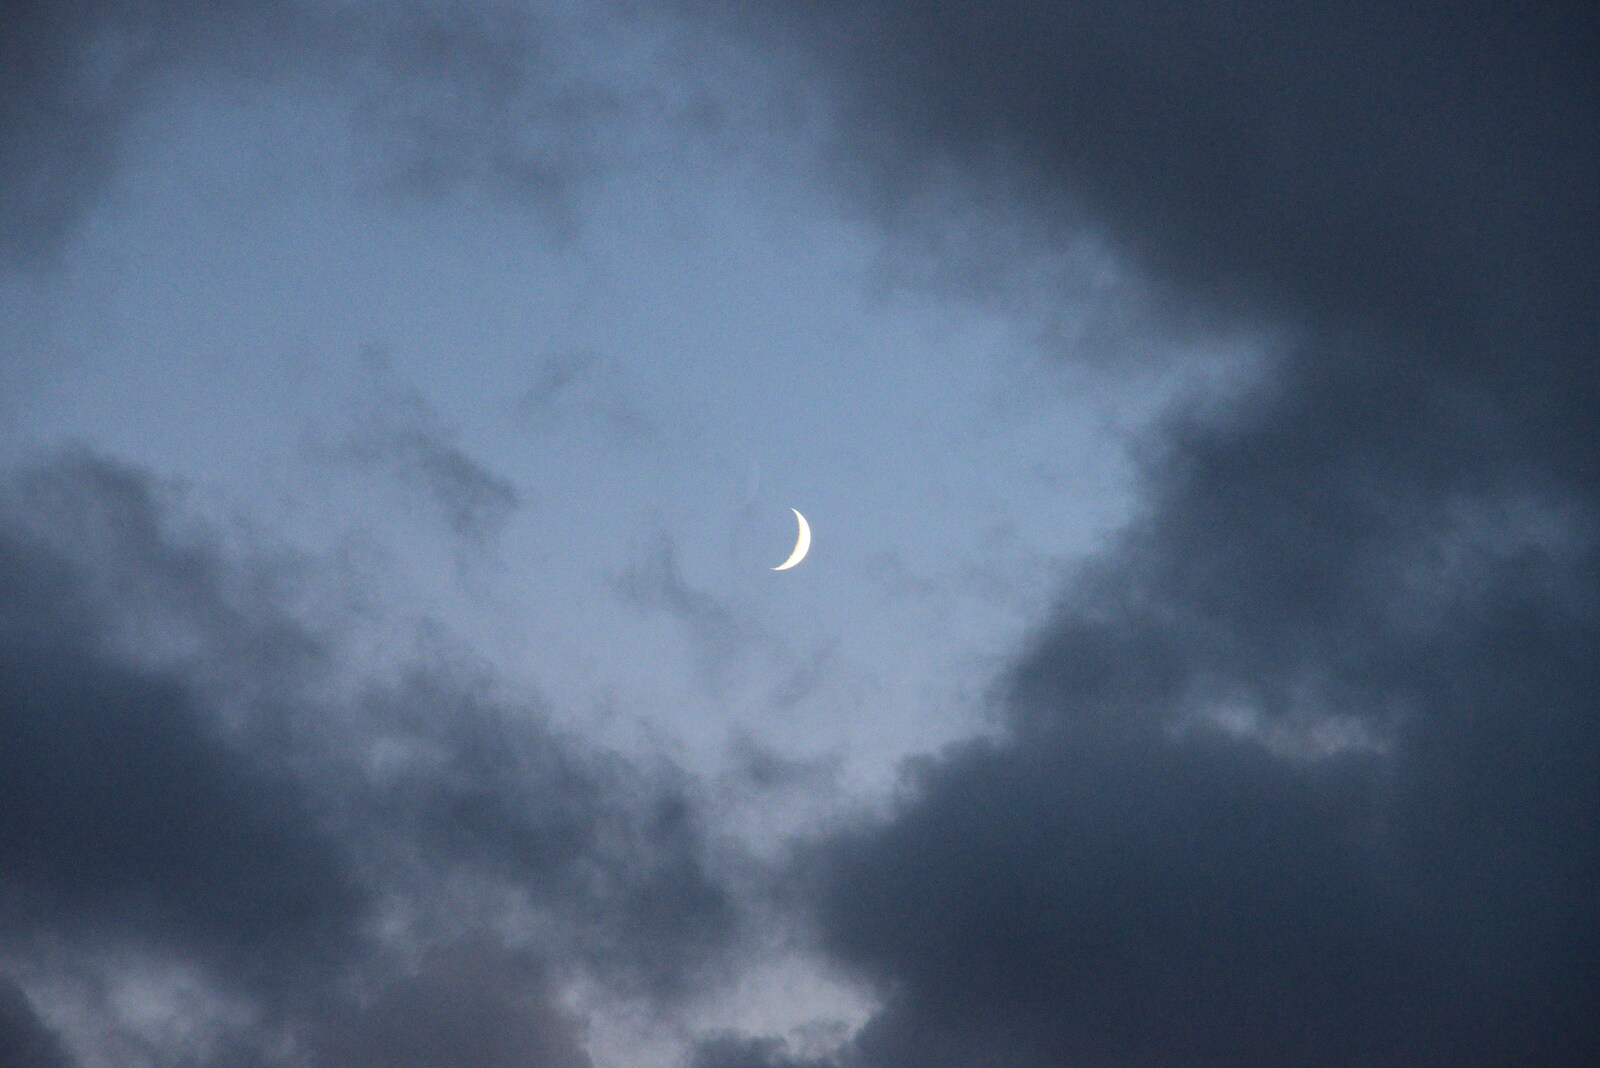 A nice crescent moon from A Game of Cricket, and a Walk Around Chagford, Devon - 23rd August 2020